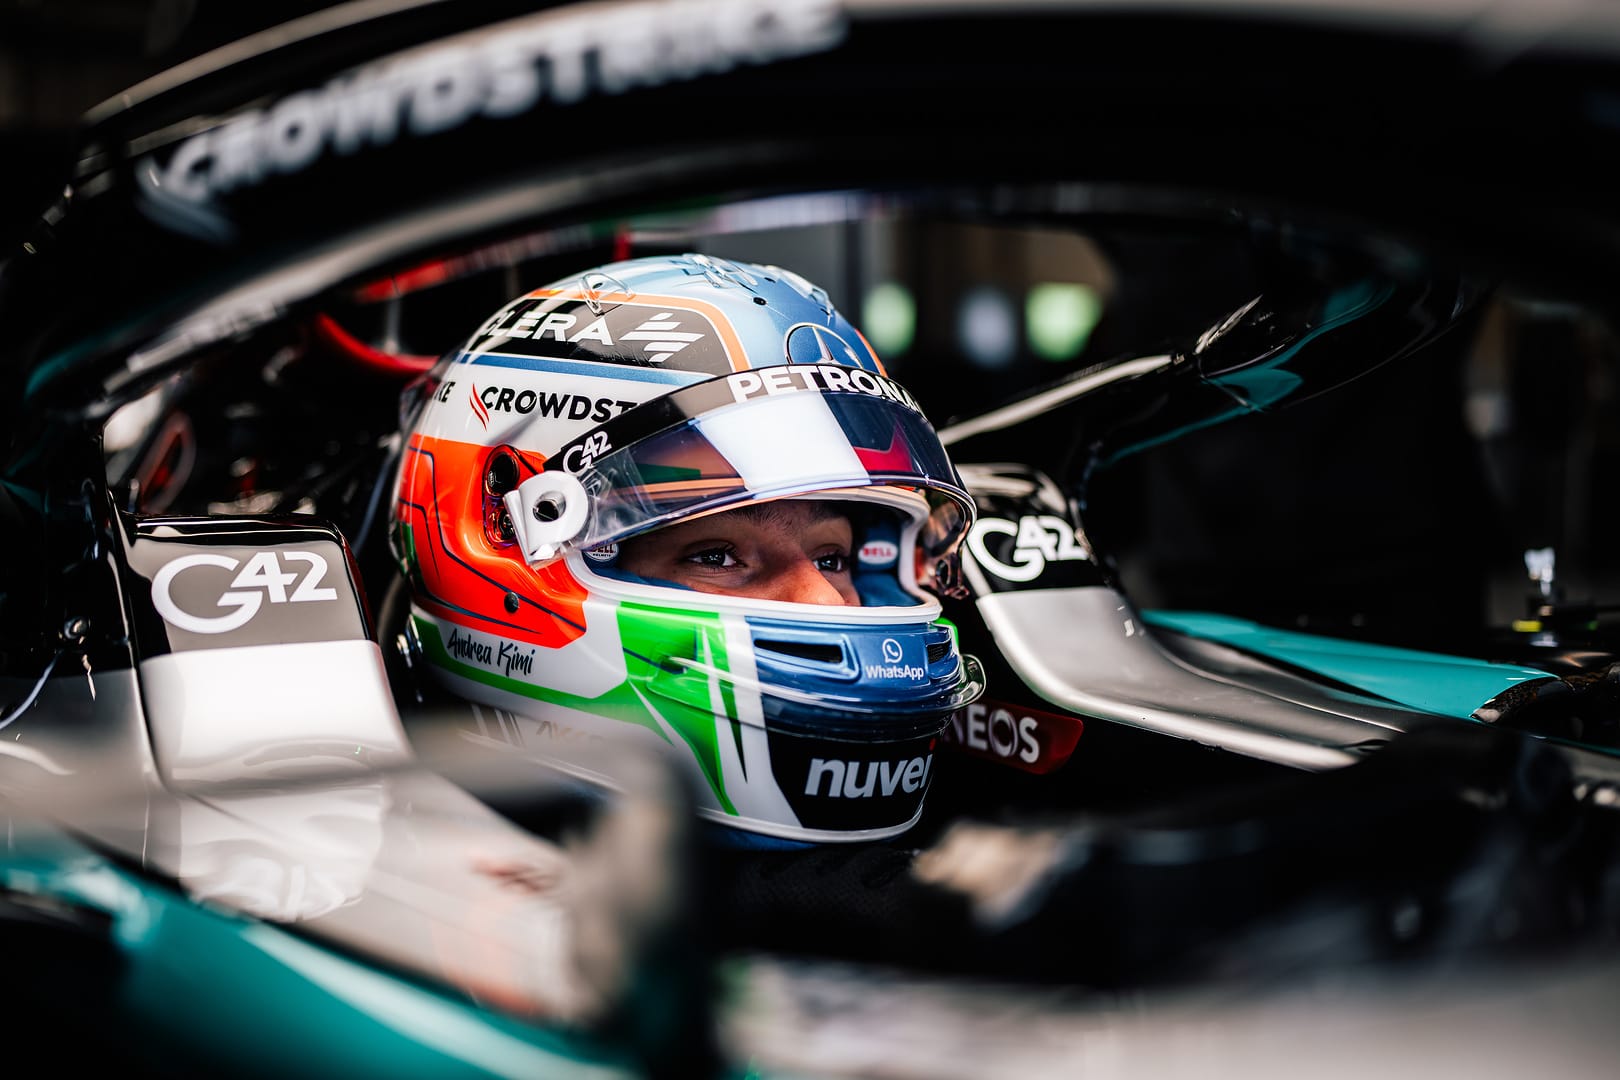 The Mercedes junior who's already ruffling F1 feathers